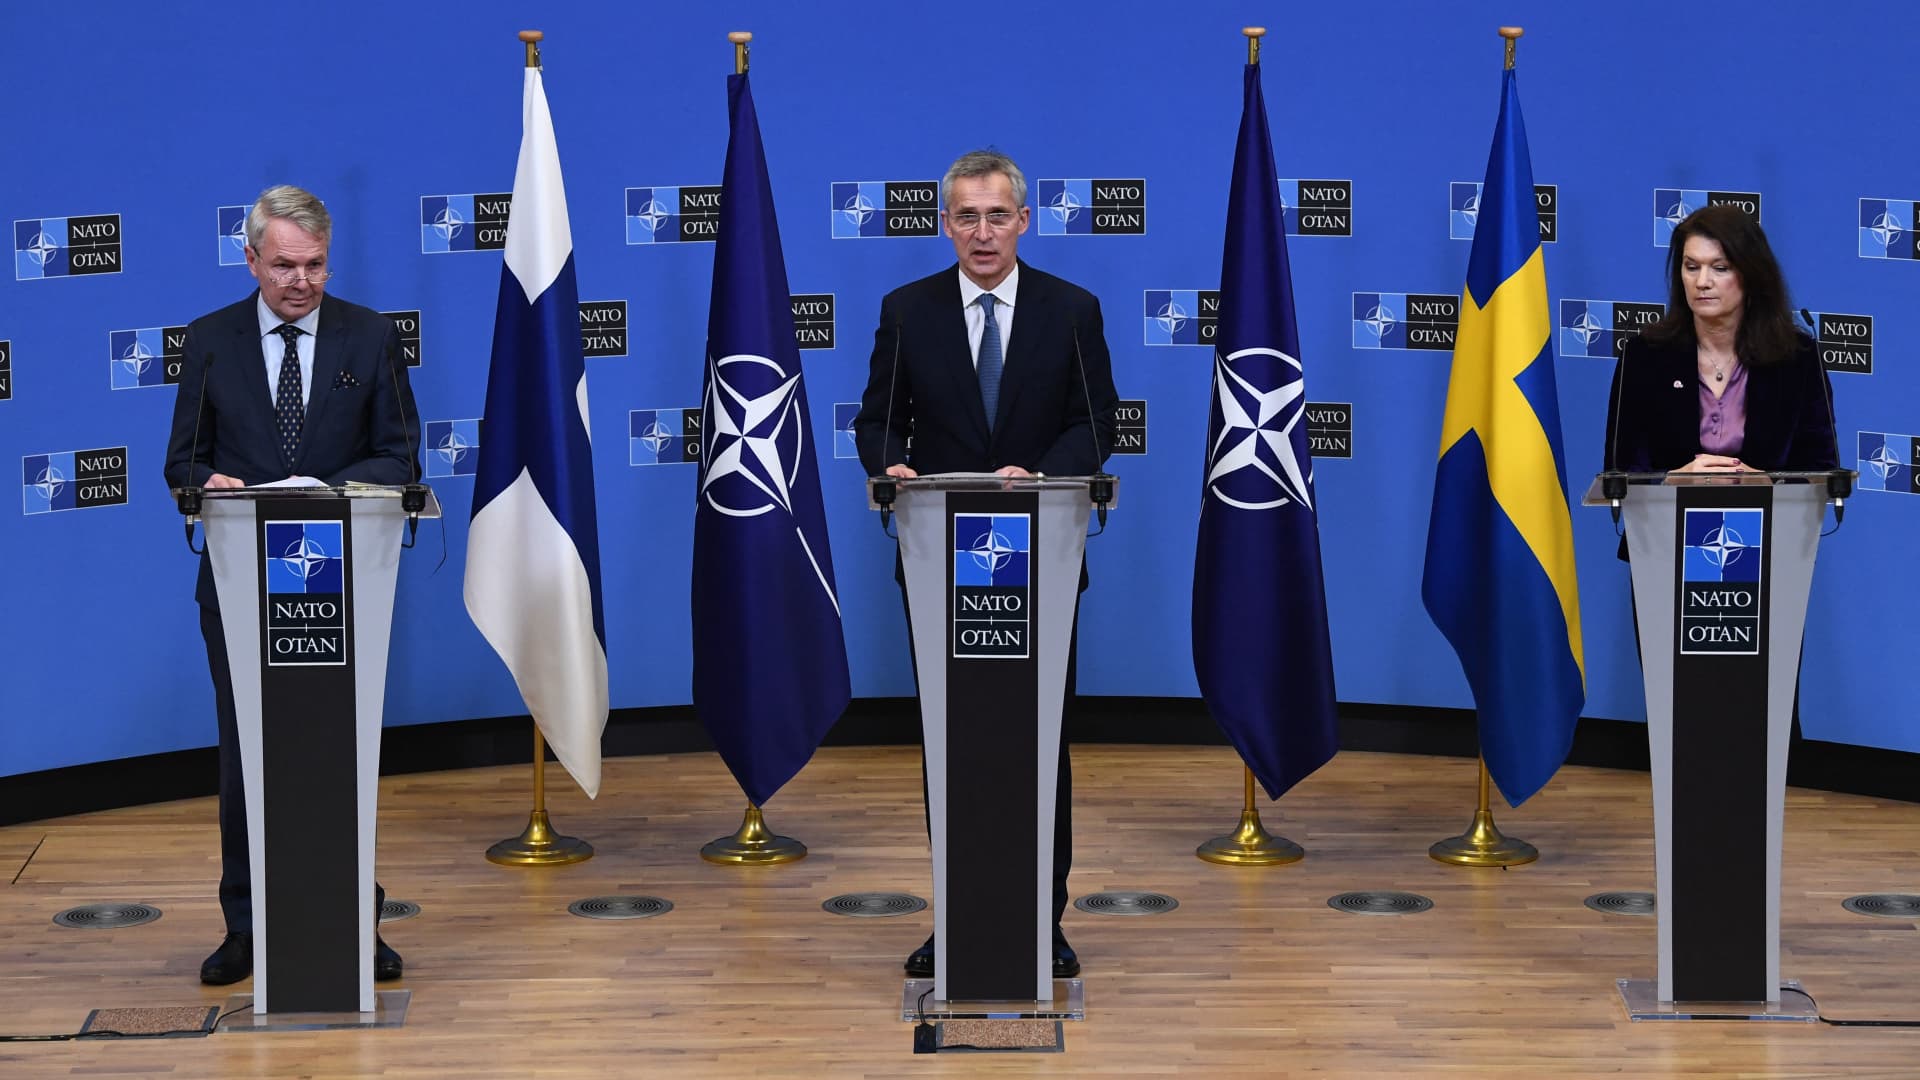 NATO Secretary General Jens Stoltenberg (C), Finland Ministers for Foreign Affairs Pekka Haavisto (L) and Sweden Foreign minister Ann Linde (R) give a press conference after their meeting at the Nato headquarters in Brussels on January 24, 2022.